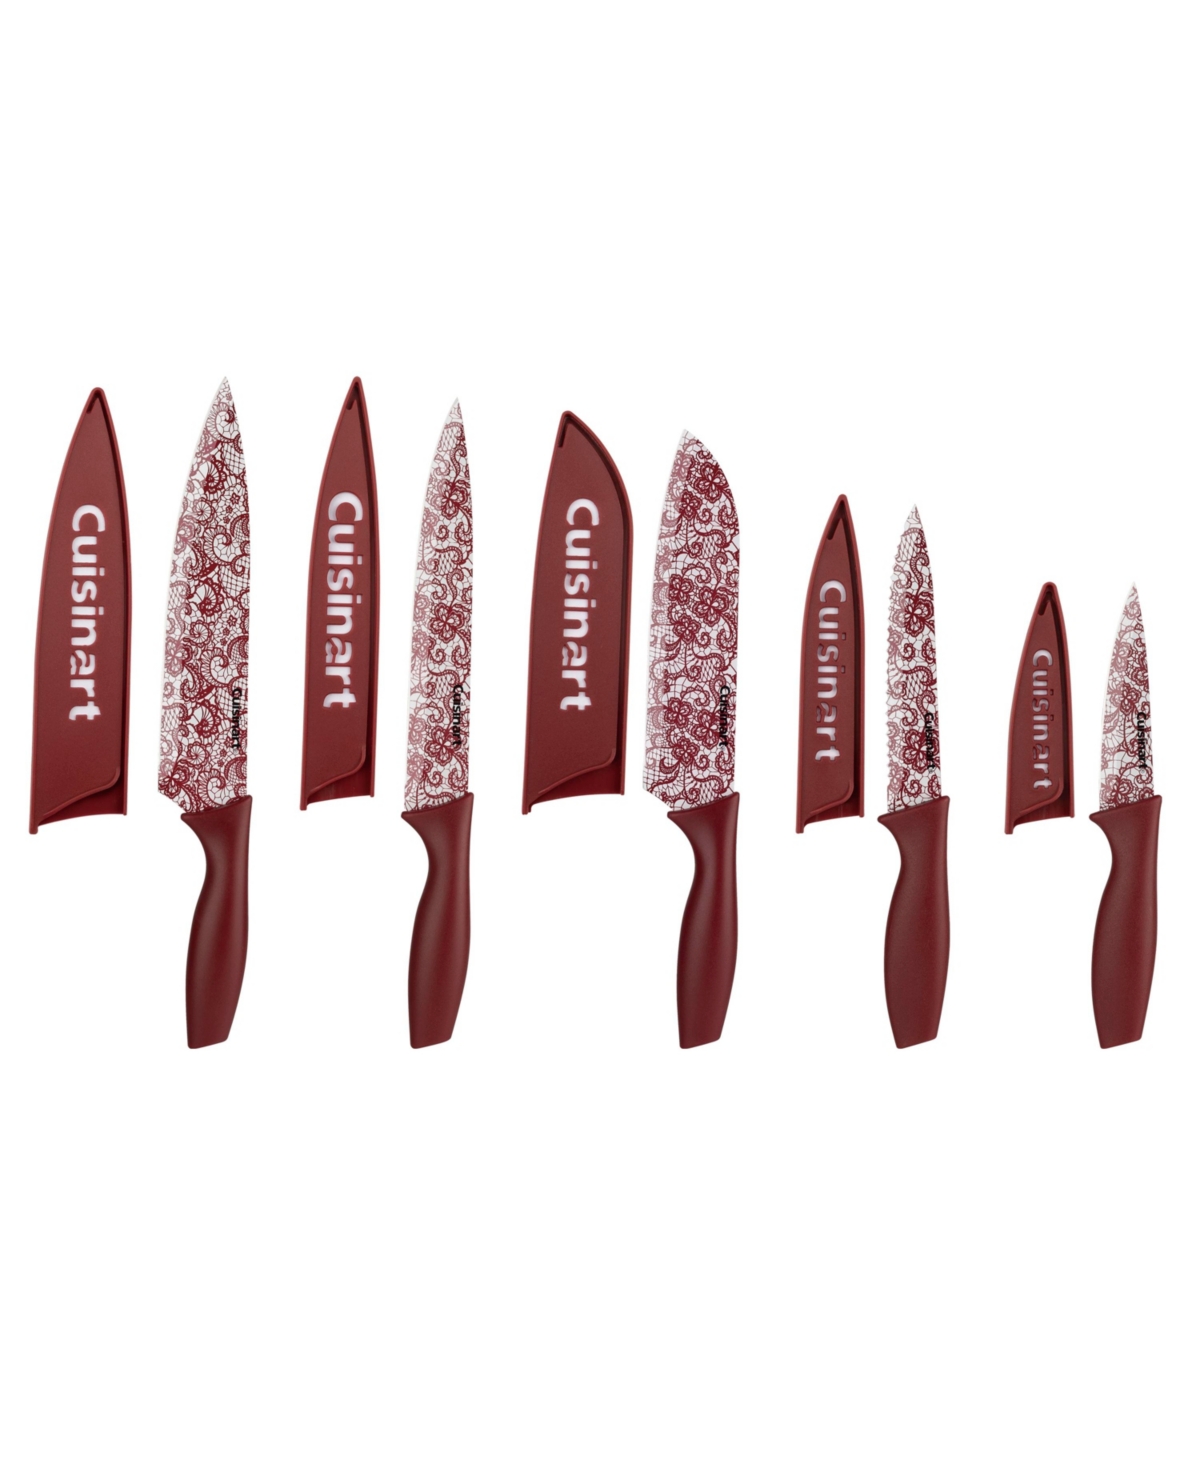 Cuisinart Stainless Steel 10 Piece Printed Cutlery Burgundy Lace Set In Burgundy  White